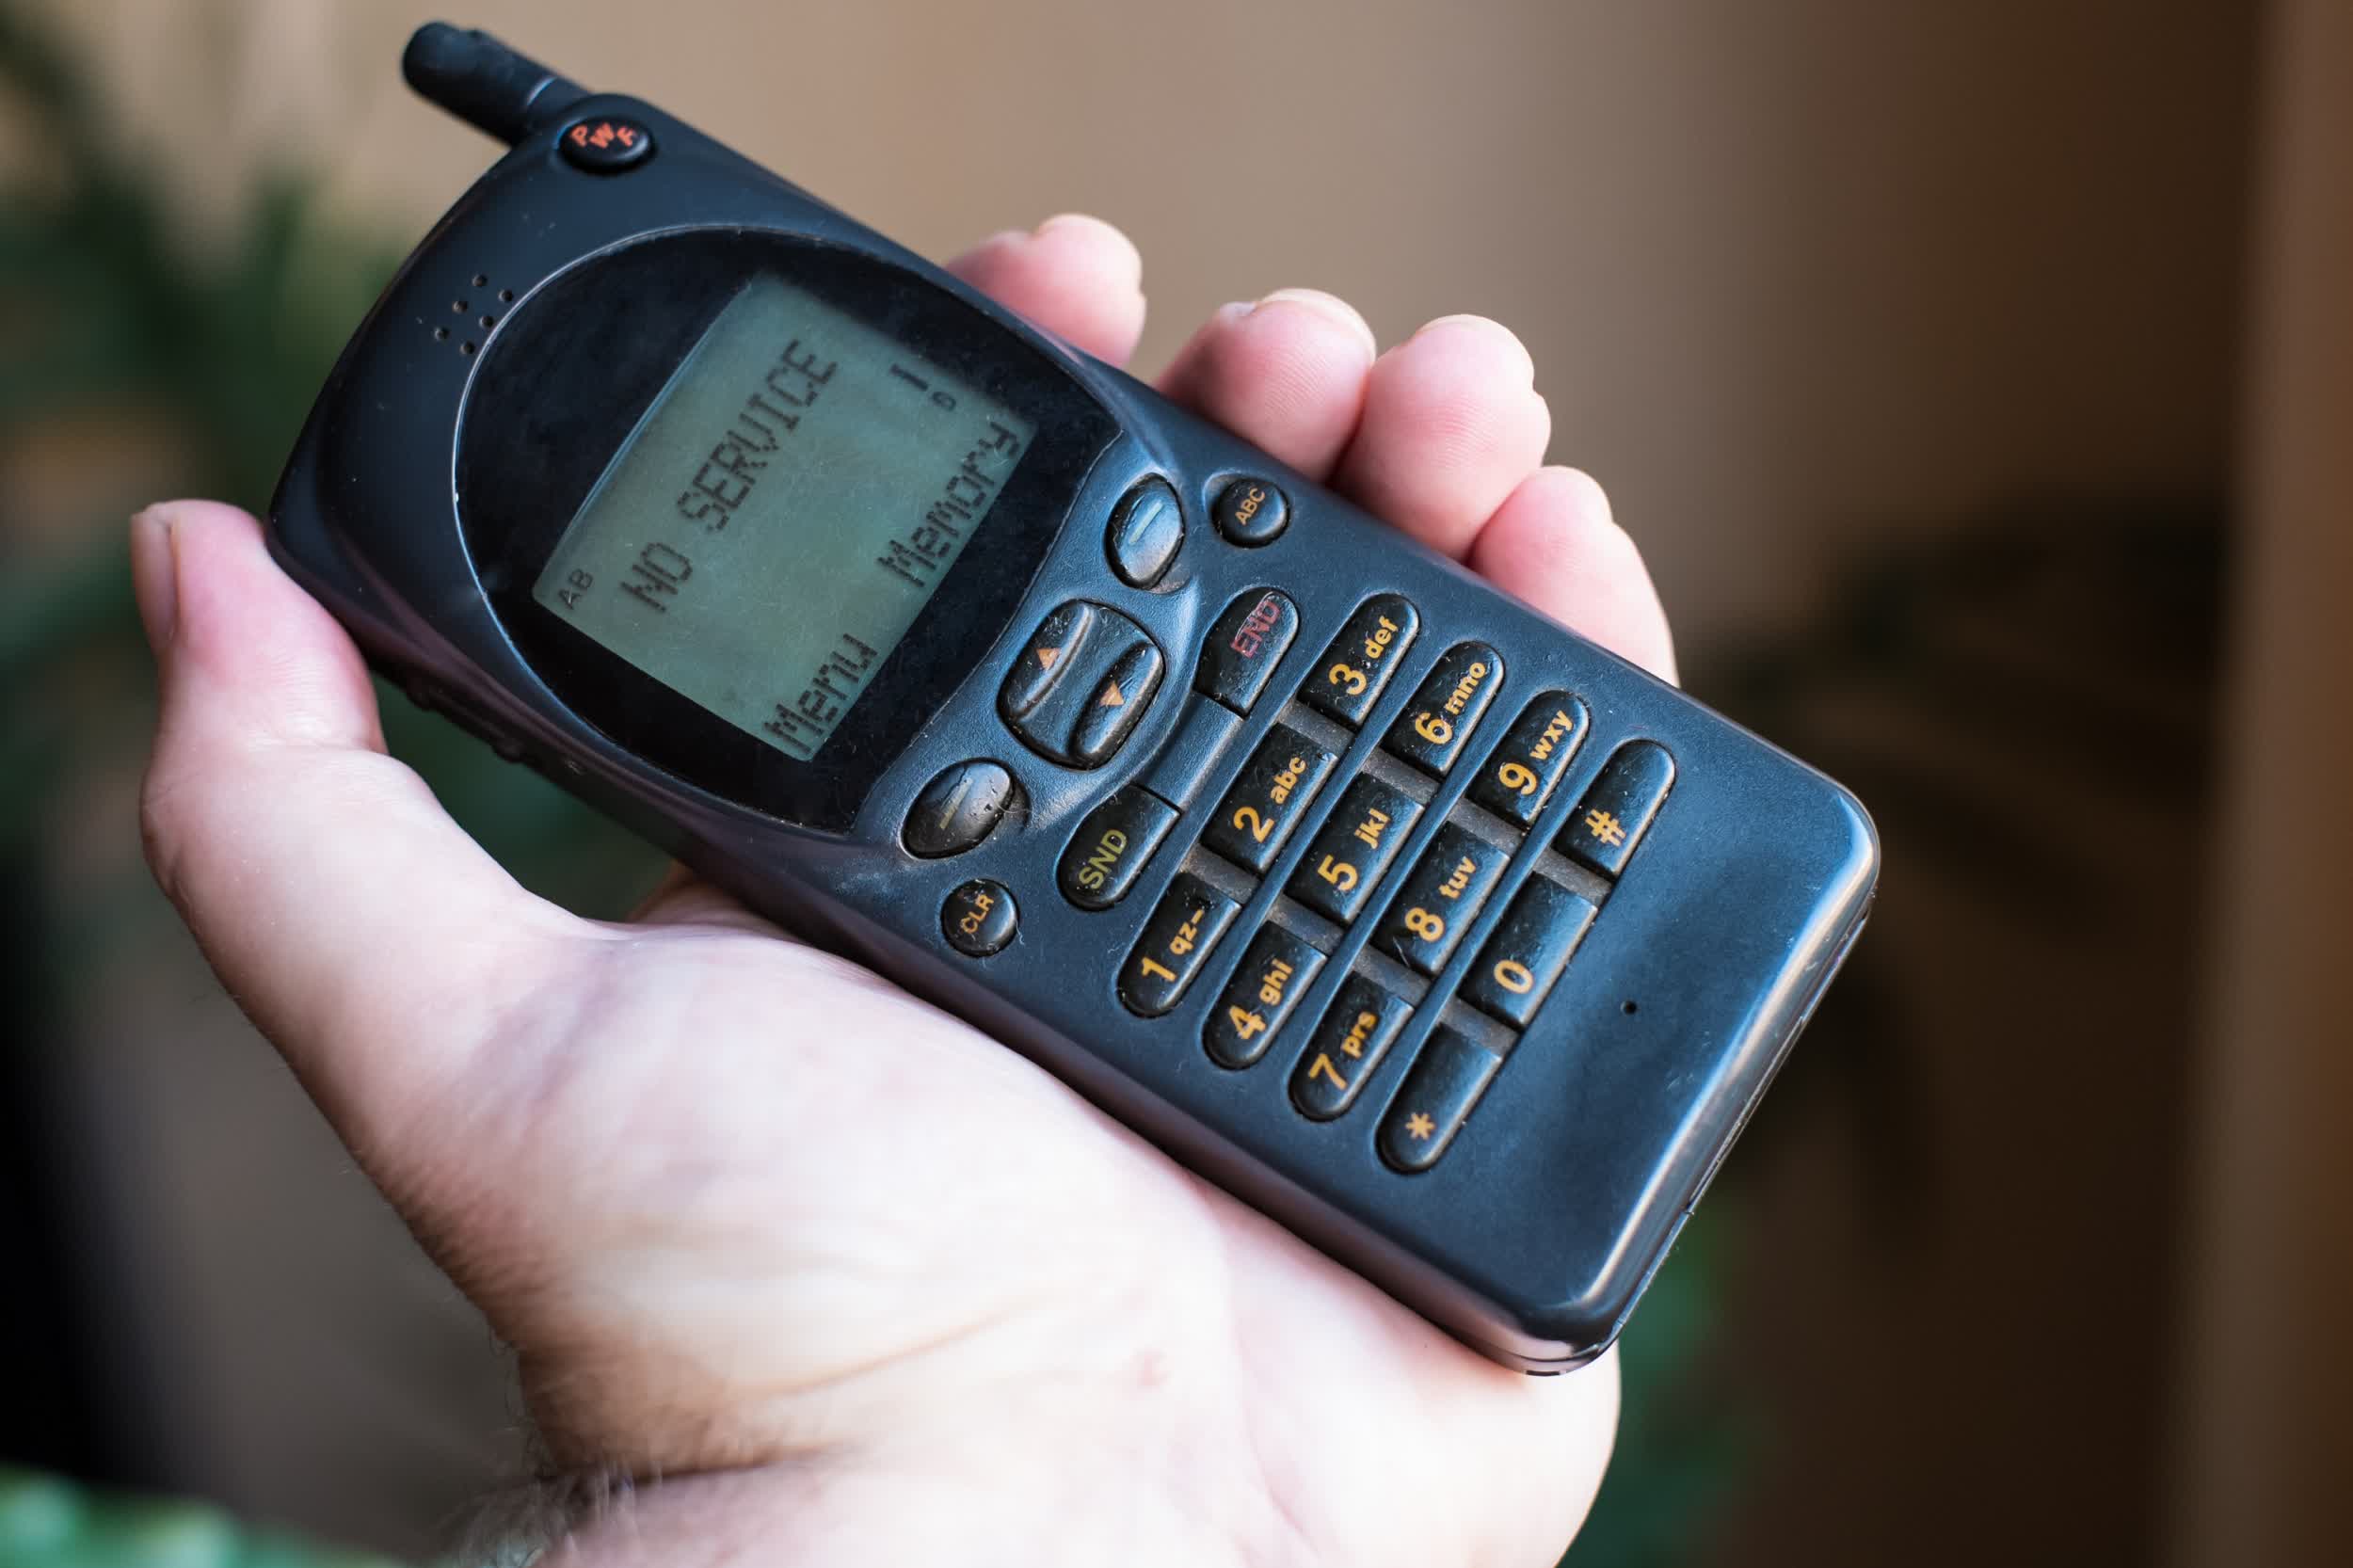 New report finds early cell phone encryption algorithm was intentionally weakened by design